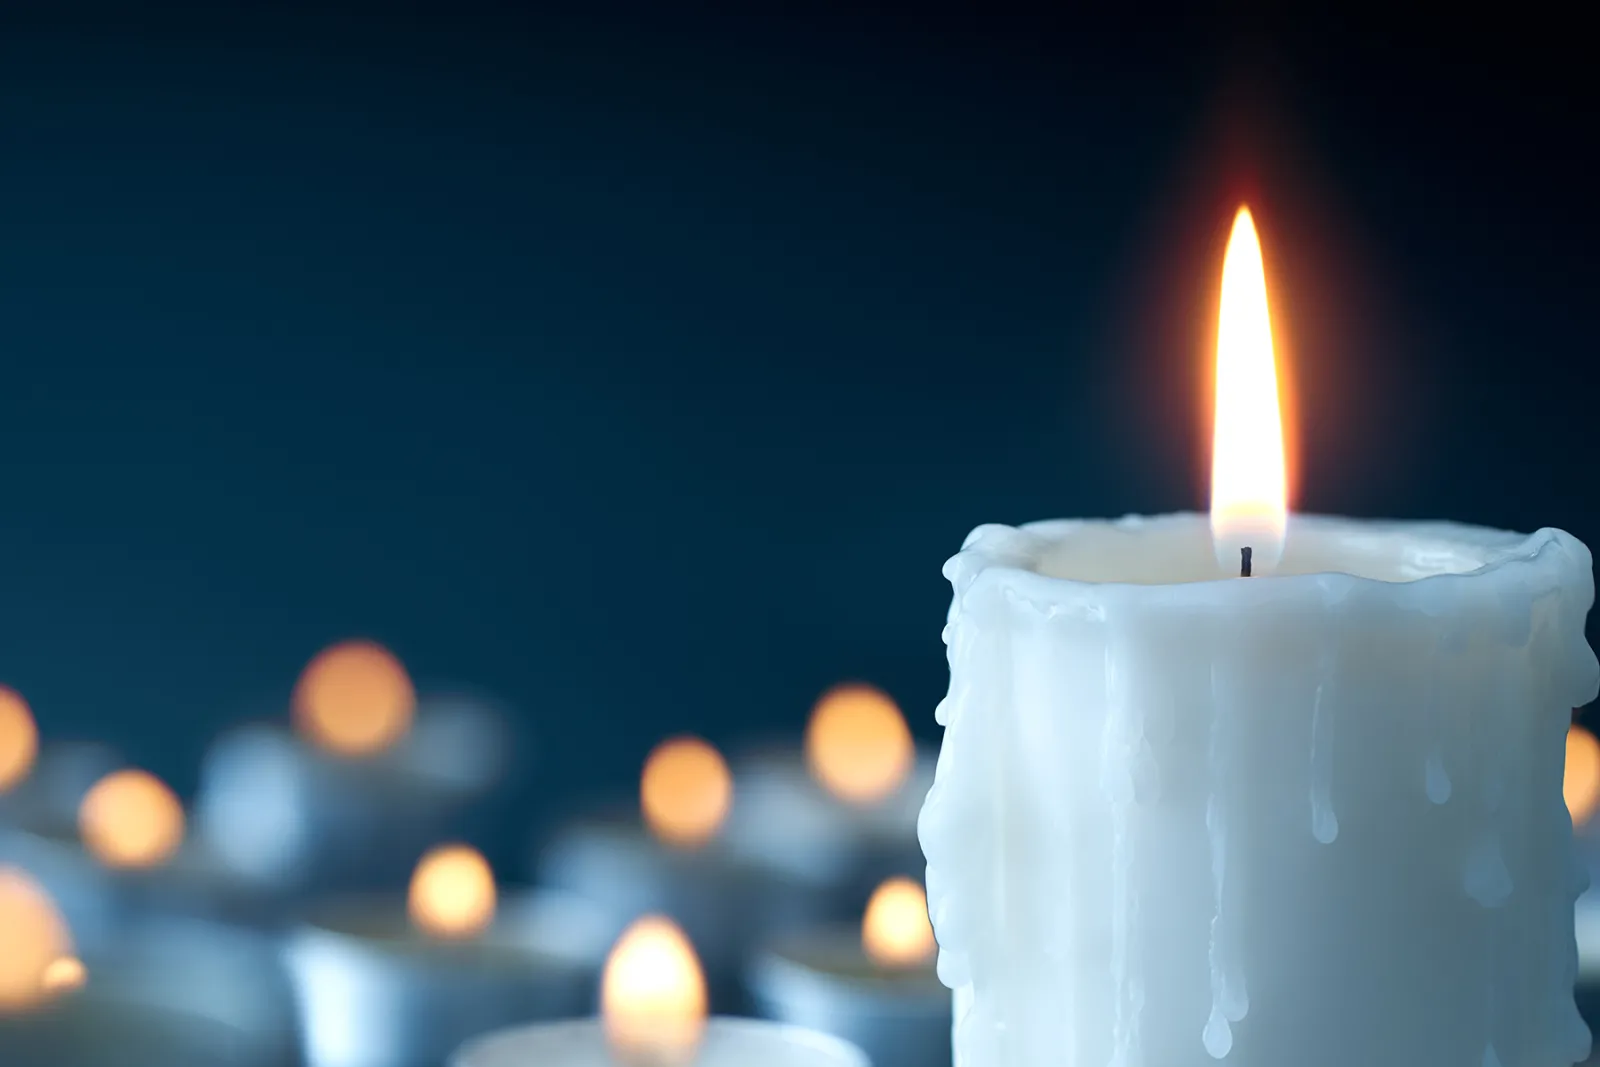 Stock photo of a burning candle